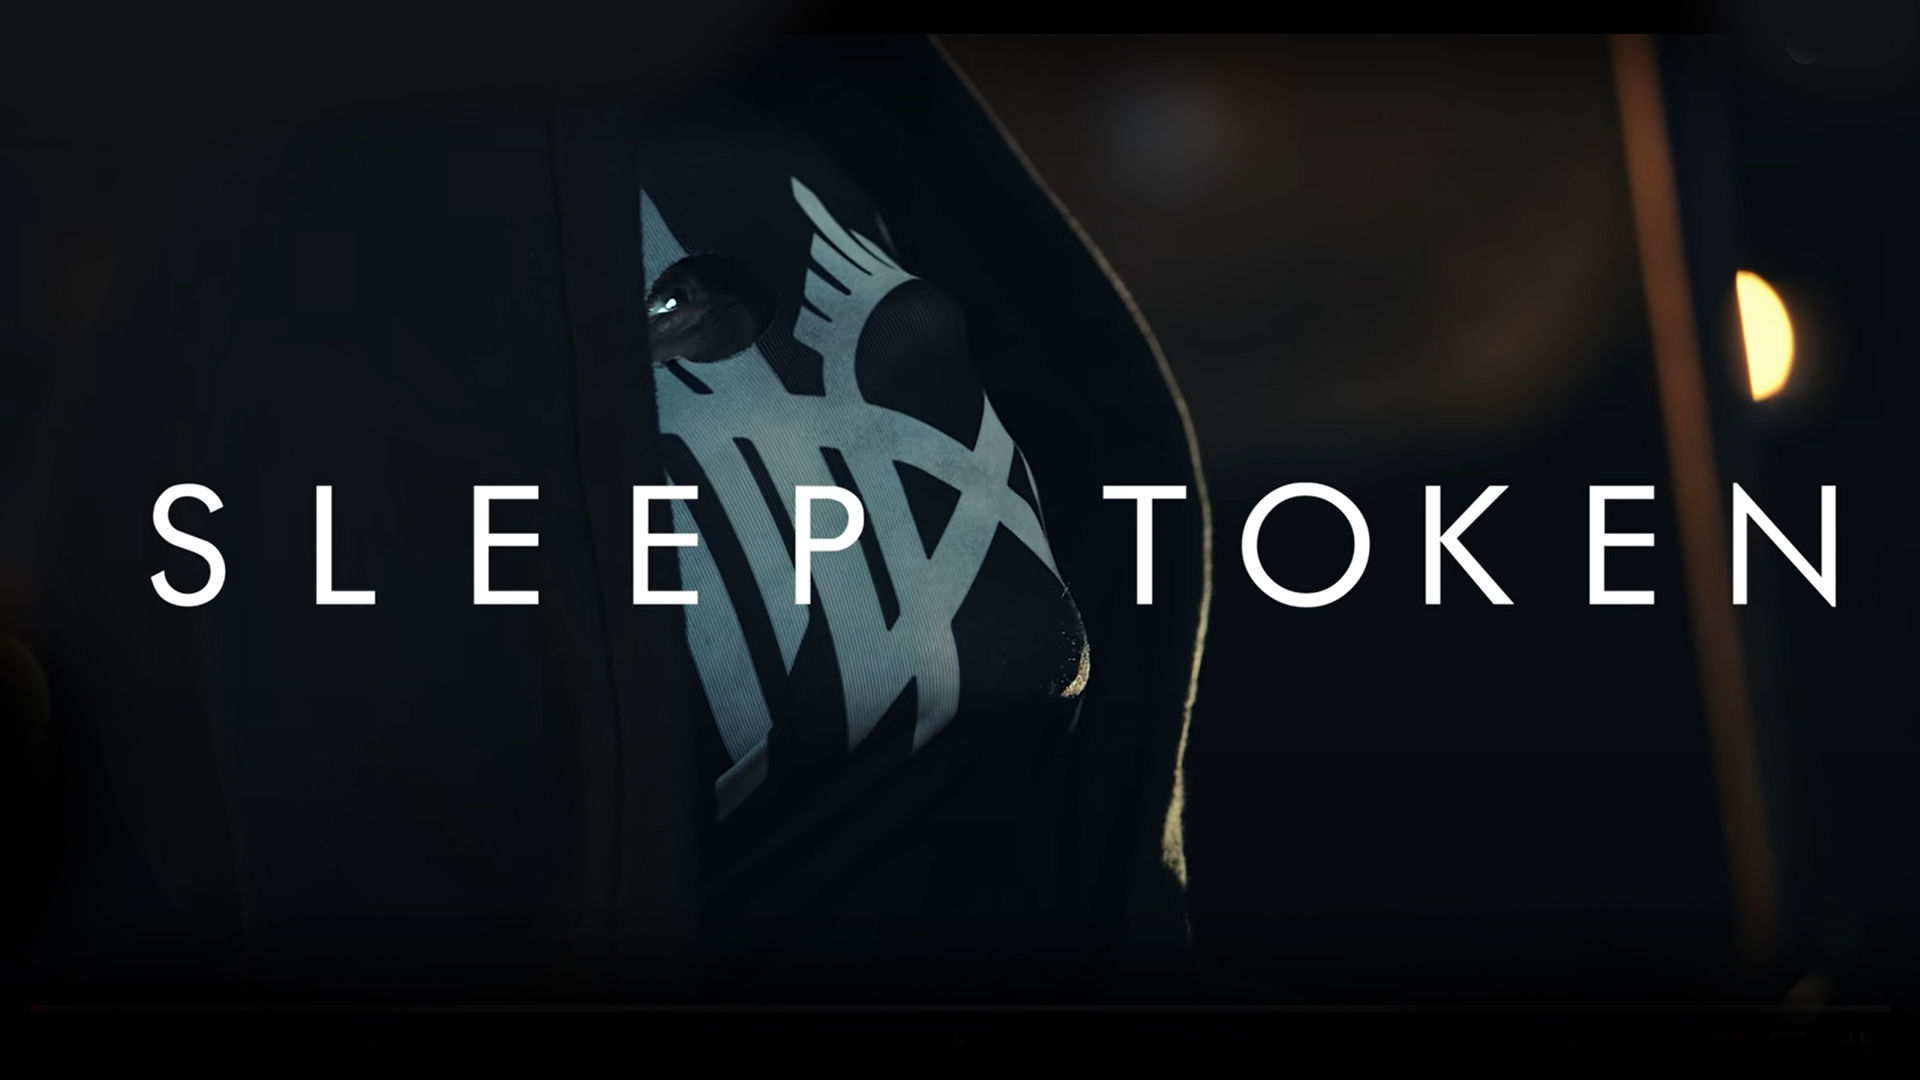 Let's Speculate The Lore of Sleep Token r/the_lovely_legion